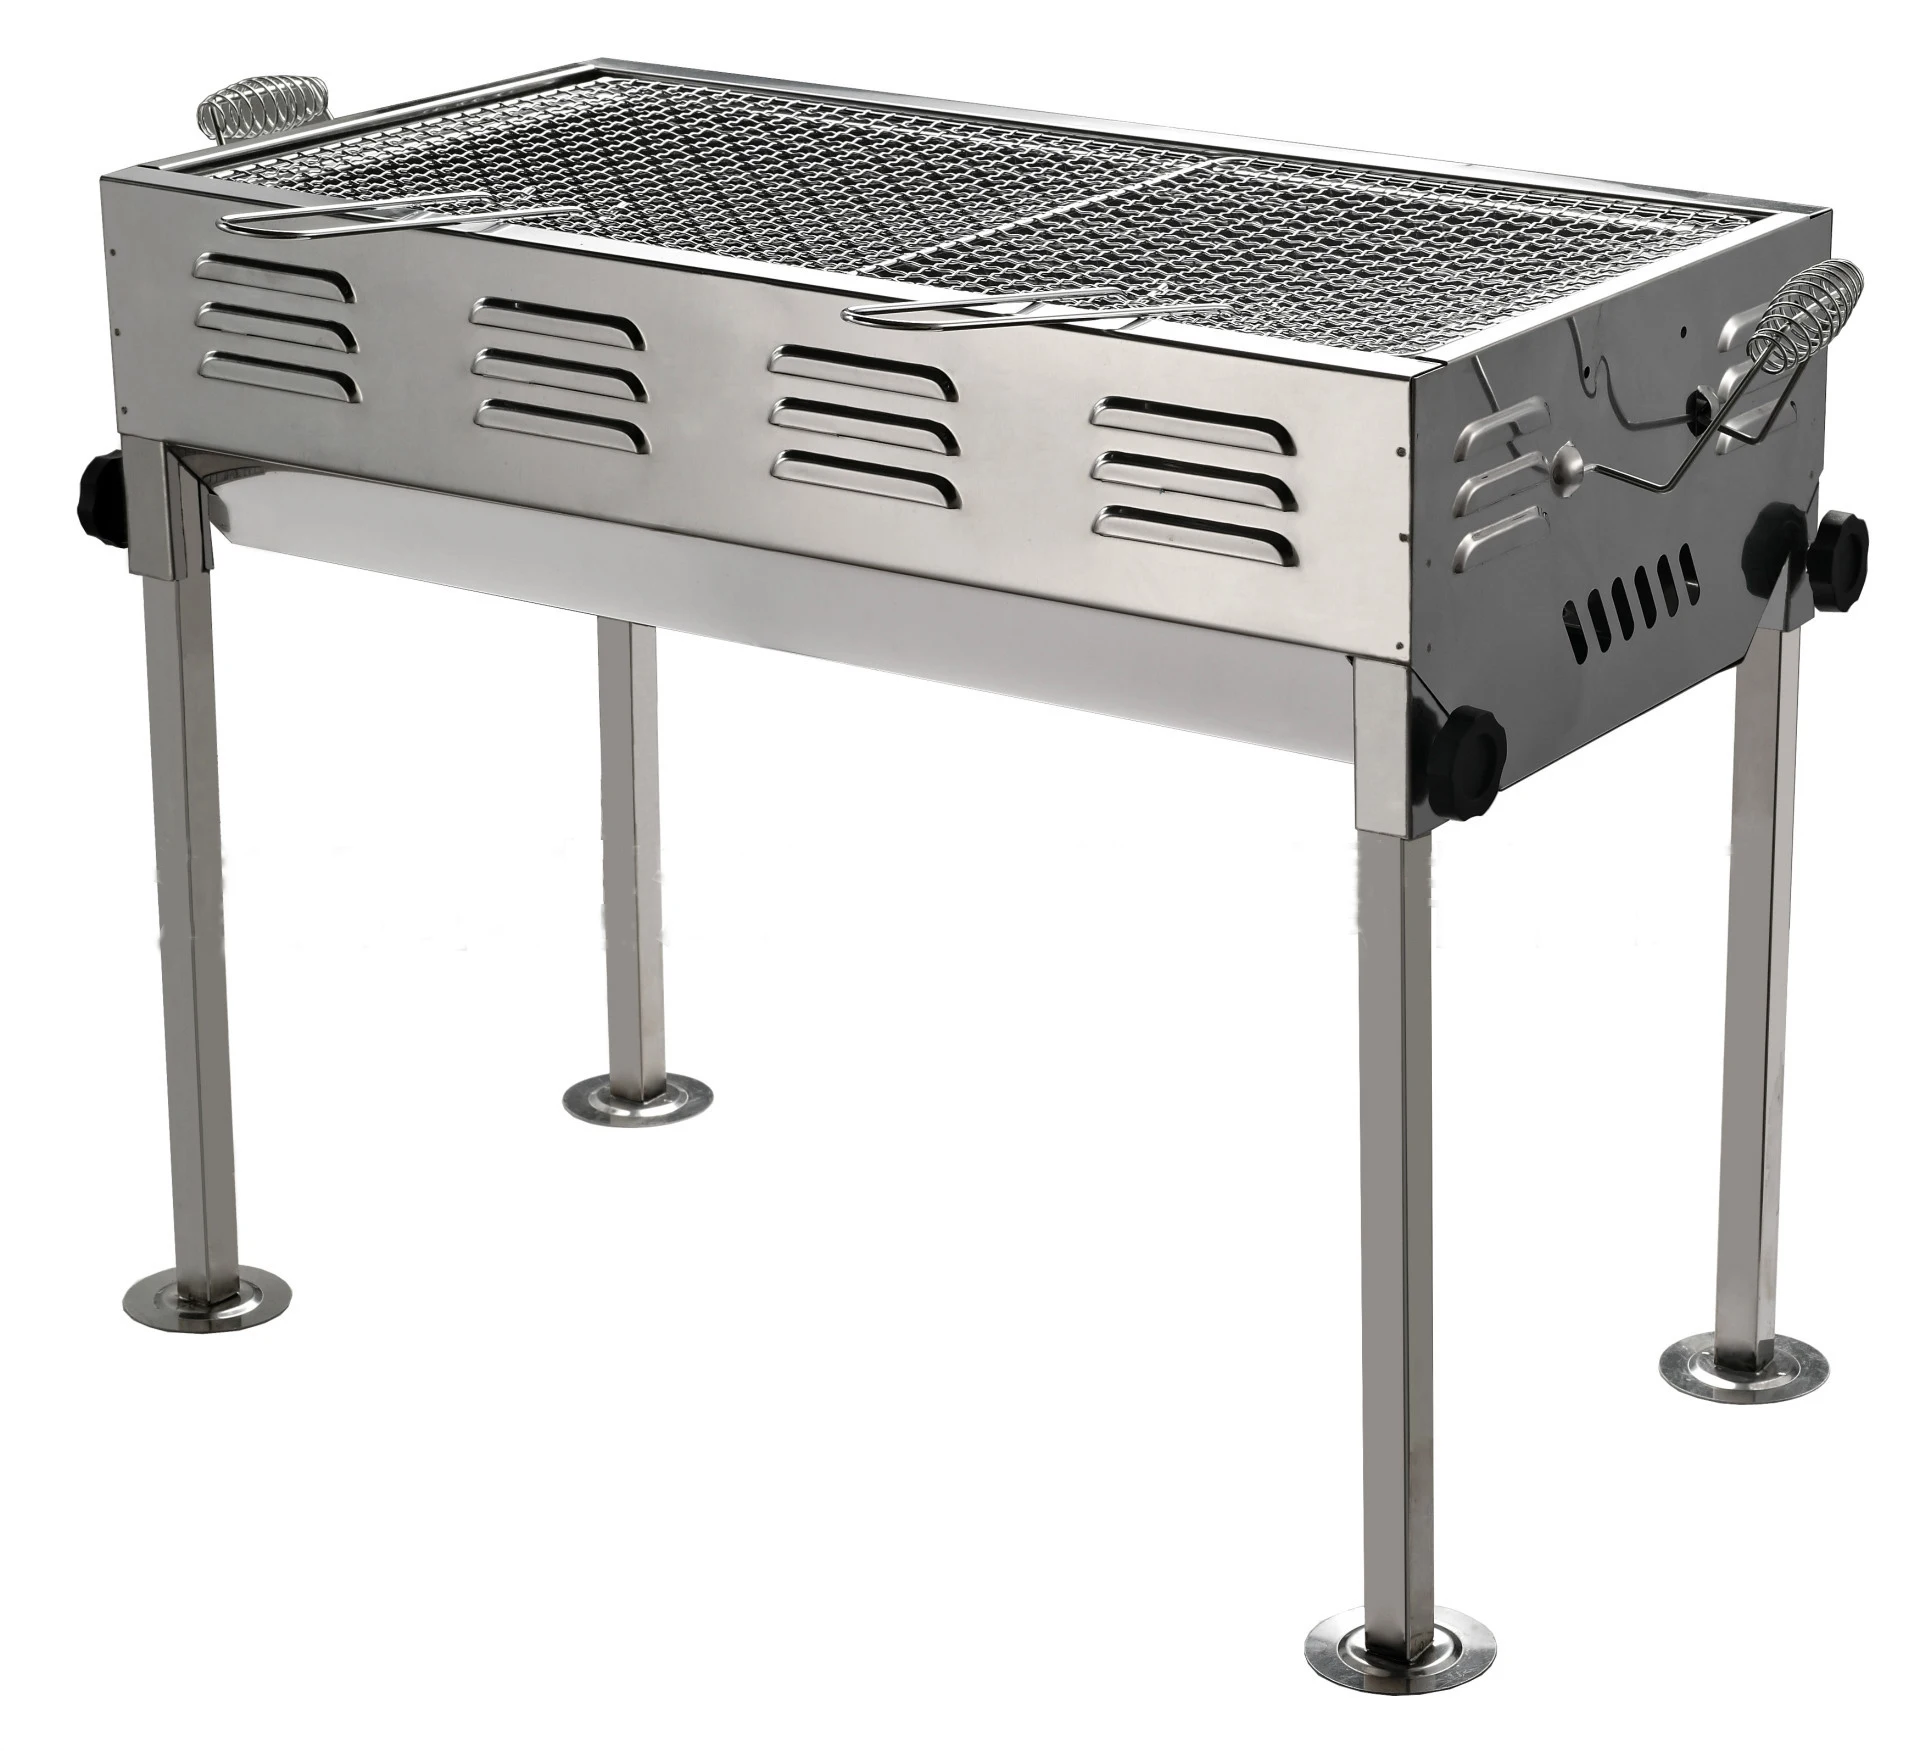 Homemade Multi-functional Stainless Steel Japanese Bbq Grill / Charcoal